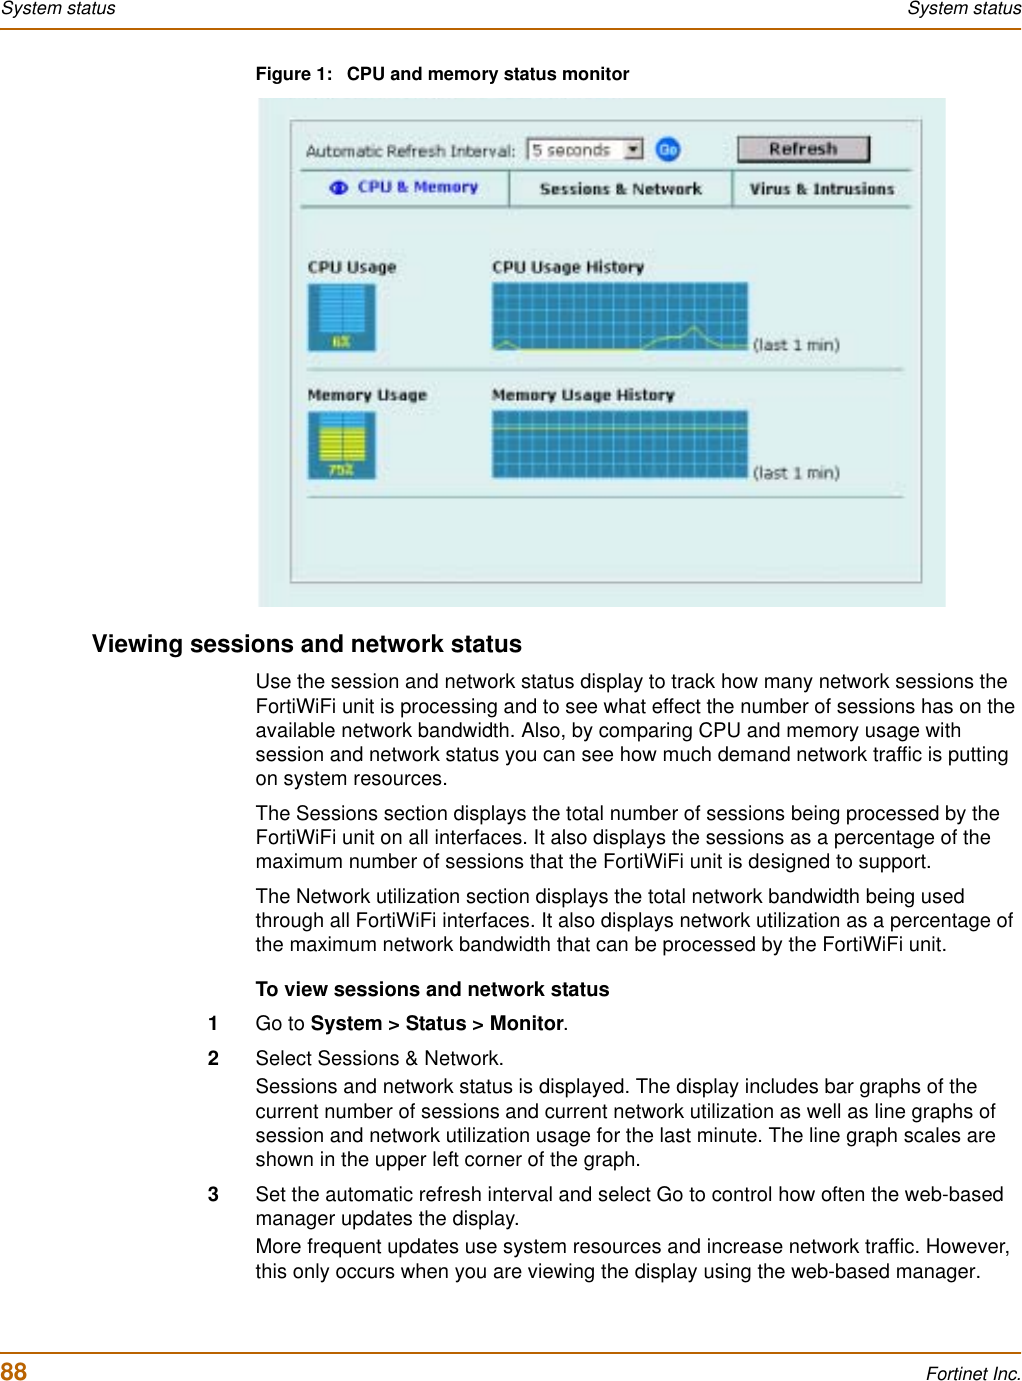 88 Fortinet Inc.System status System statusFigure 1: CPU and memory status monitorViewing sessions and network statusUse the session and network status display to track how many network sessions the FortiWiFi unit is processing and to see what effect the number of sessions has on the available network bandwidth. Also, by comparing CPU and memory usage with session and network status you can see how much demand network traffic is putting on system resources.The Sessions section displays the total number of sessions being processed by the FortiWiFi unit on all interfaces. It also displays the sessions as a percentage of the maximum number of sessions that the FortiWiFi unit is designed to support.The Network utilization section displays the total network bandwidth being used through all FortiWiFi interfaces. It also displays network utilization as a percentage of the maximum network bandwidth that can be processed by the FortiWiFi unit.To view sessions and network status1Go to System &gt; Status &gt; Monitor.2Select Sessions &amp; Network.Sessions and network status is displayed. The display includes bar graphs of the current number of sessions and current network utilization as well as line graphs of session and network utilization usage for the last minute. The line graph scales are shown in the upper left corner of the graph.3Set the automatic refresh interval and select Go to control how often the web-based manager updates the display. More frequent updates use system resources and increase network traffic. However, this only occurs when you are viewing the display using the web-based manager.